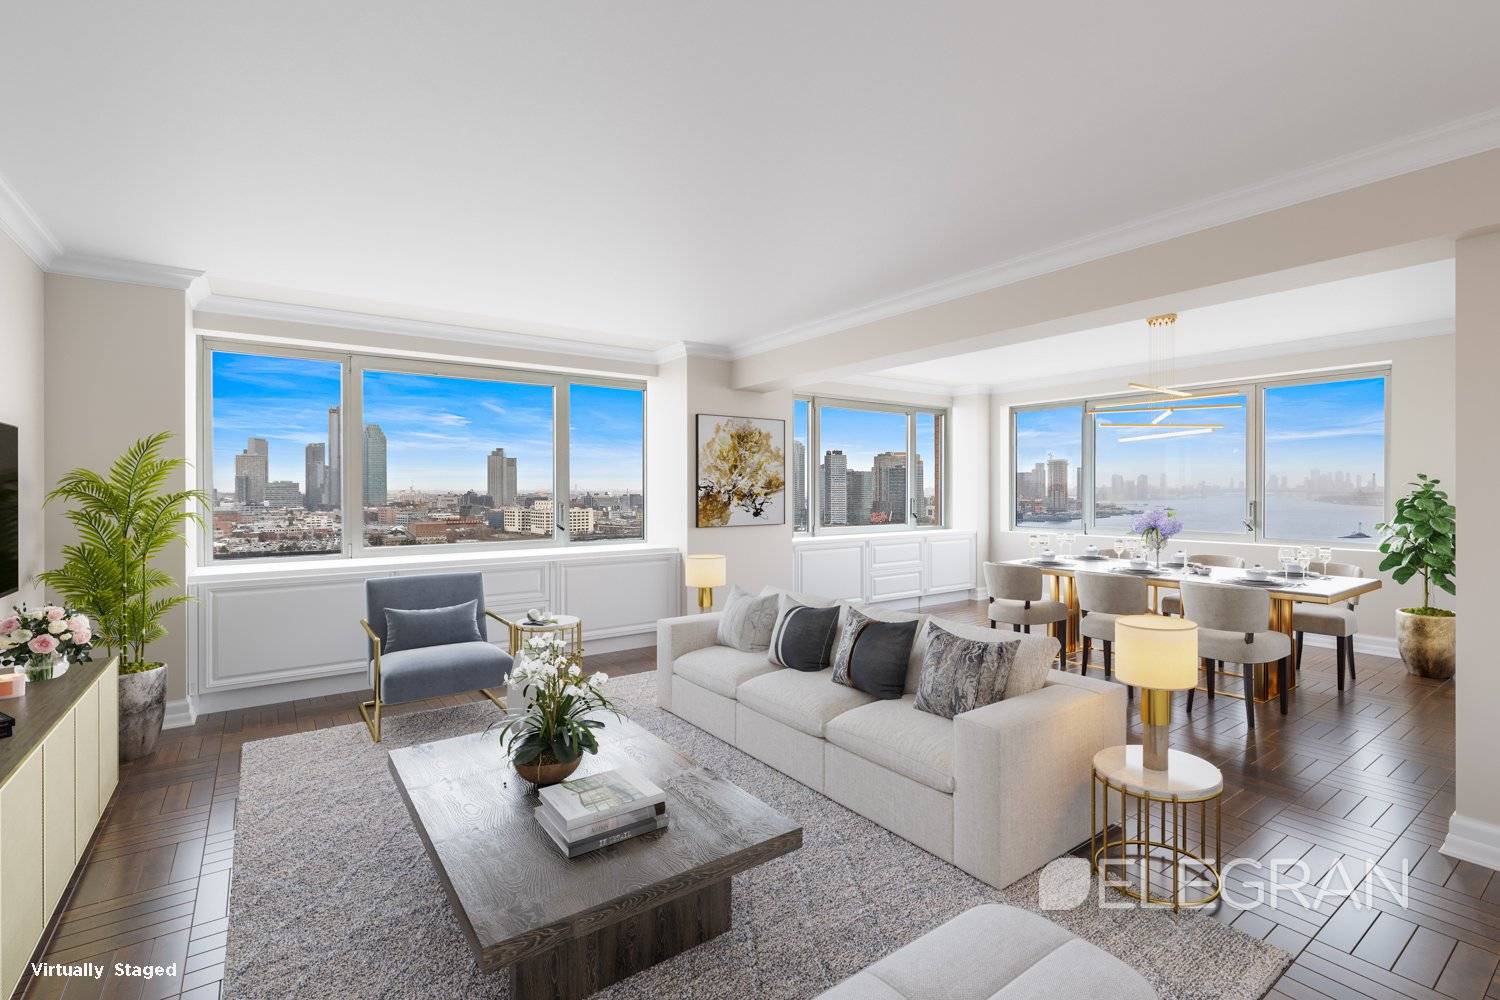 Priced to sell, this rarely available and highly sought after convertible 3 bedroom, 2 bathroom features stunning views of the East River from every room !